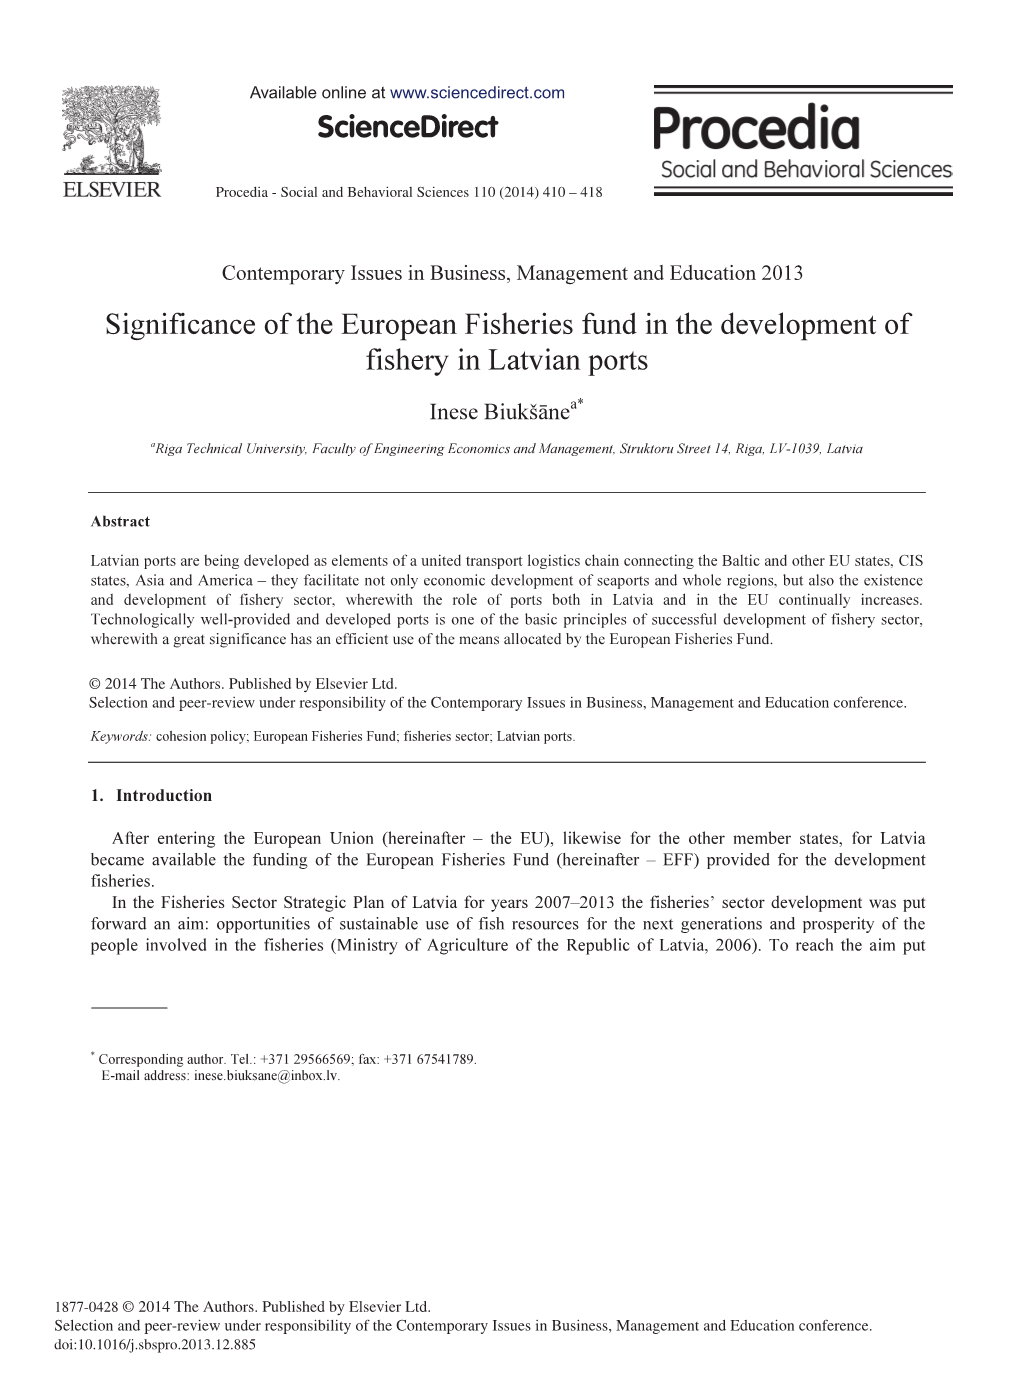 Significance of the European Fisheries Fund in the Development of Fishery in Latvian Ports Inese Biukšānea*